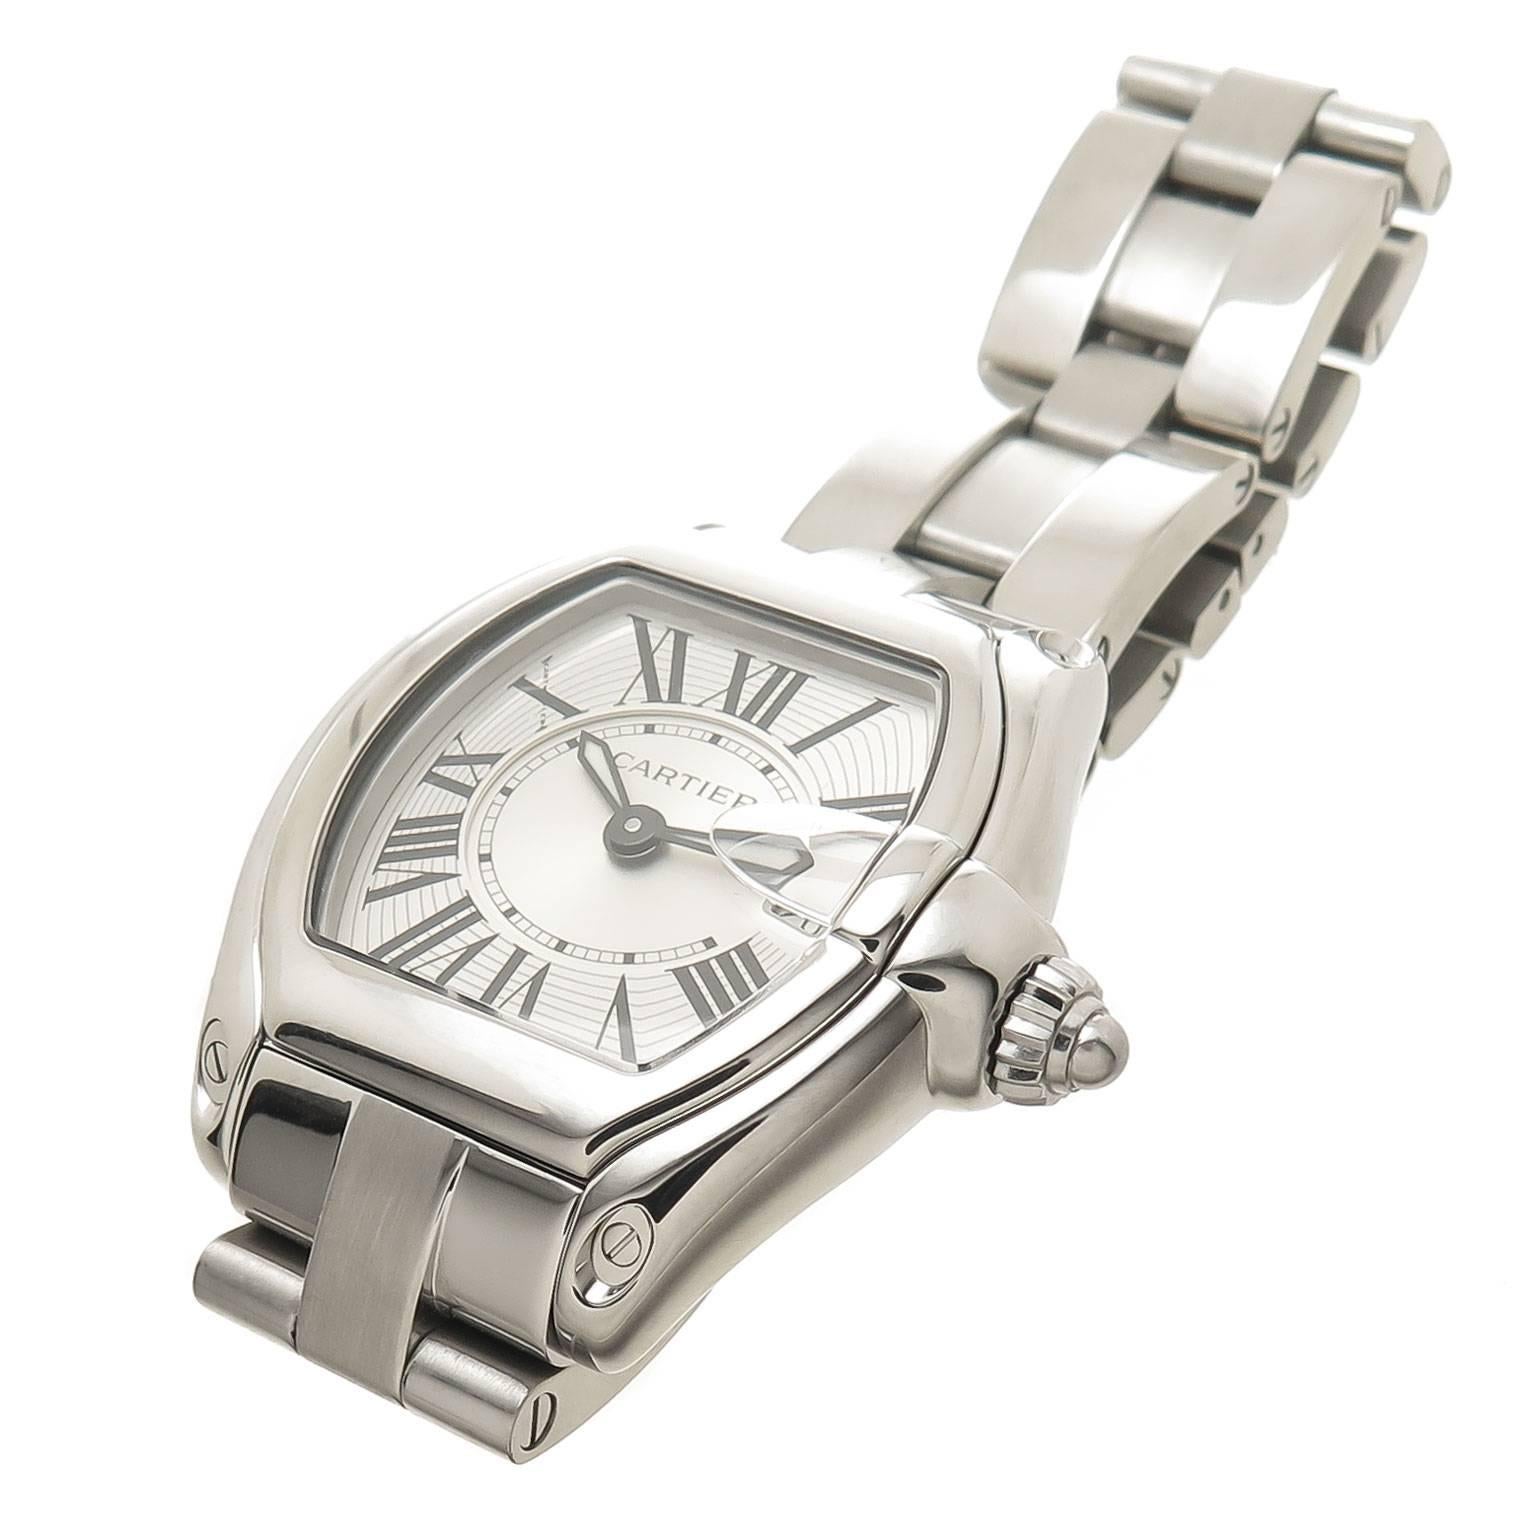 Circa 2012 Cartier Ladies Roadster Wrist watch, 37 X 31 MM Stainless Steel Water resistant Case. Quartz Movement, Silver Engine Turned Dial with Black roman Numerals and a Calendar window at the 3 position. 5/8 inch wide Stainless Steel Bracelet